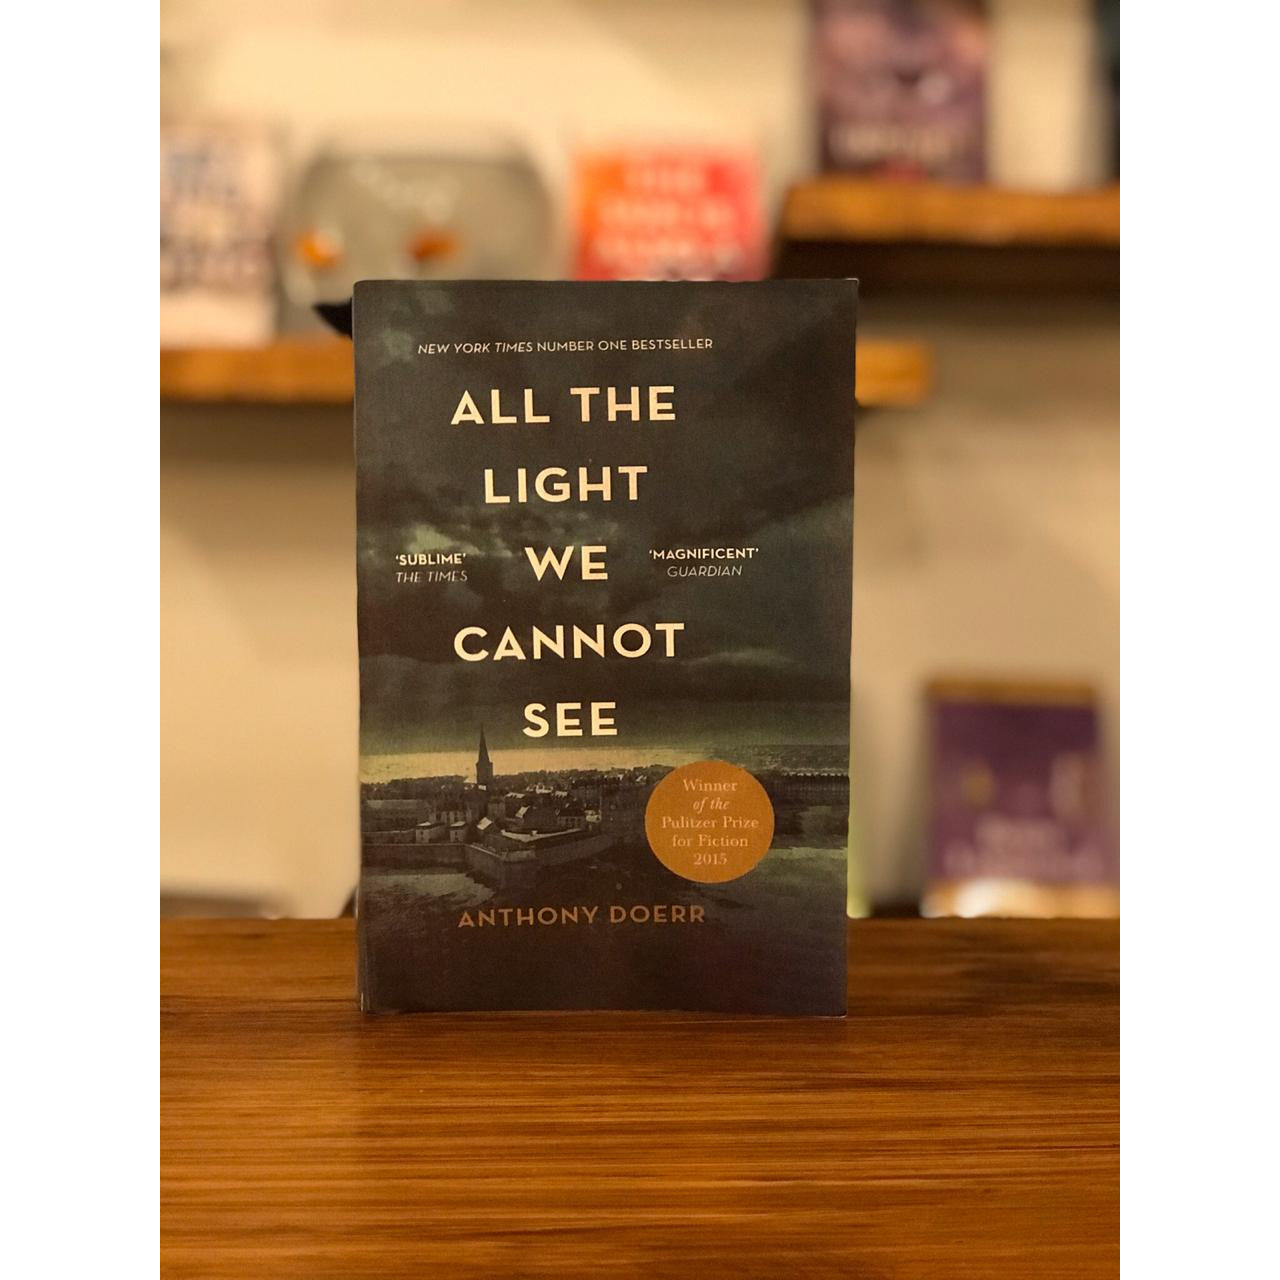 All The Light Cannot See By Anthony Doerr